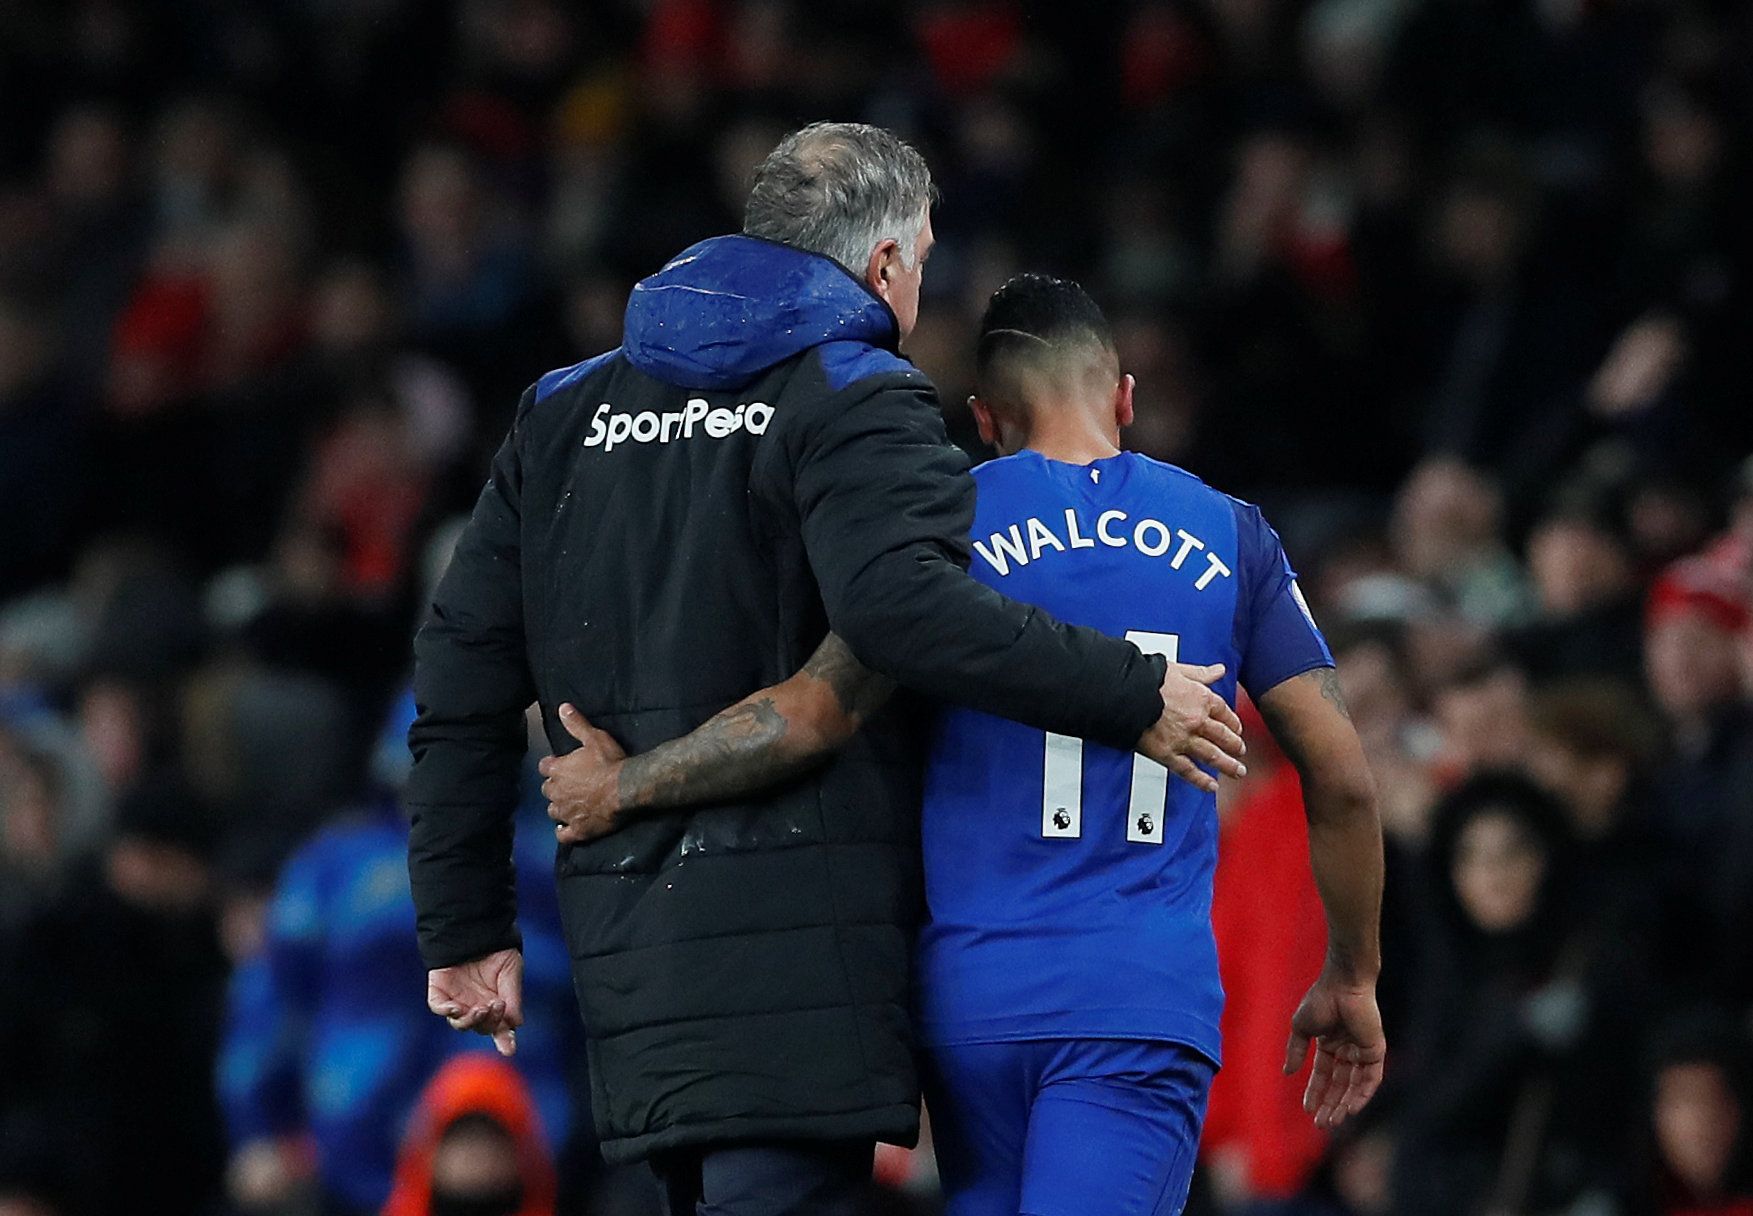 Soccer Football - Premier League - Arsenal vs Everton - Emirates Stadium, London, Britain - February 3, 2018   Everton's Theo Walcott with manager Sam Allardyce after being substituted off for Dominic Calvert-Lewin    REUTERS/David Klein    EDITORIAL USE ONLY. No use with unauthorized audio, video, data, fixture lists, club/league logos or "live" services. Online in-match use limited to 75 images, no video emulation. No use in betting, games or single club/league/player publications.  Please con